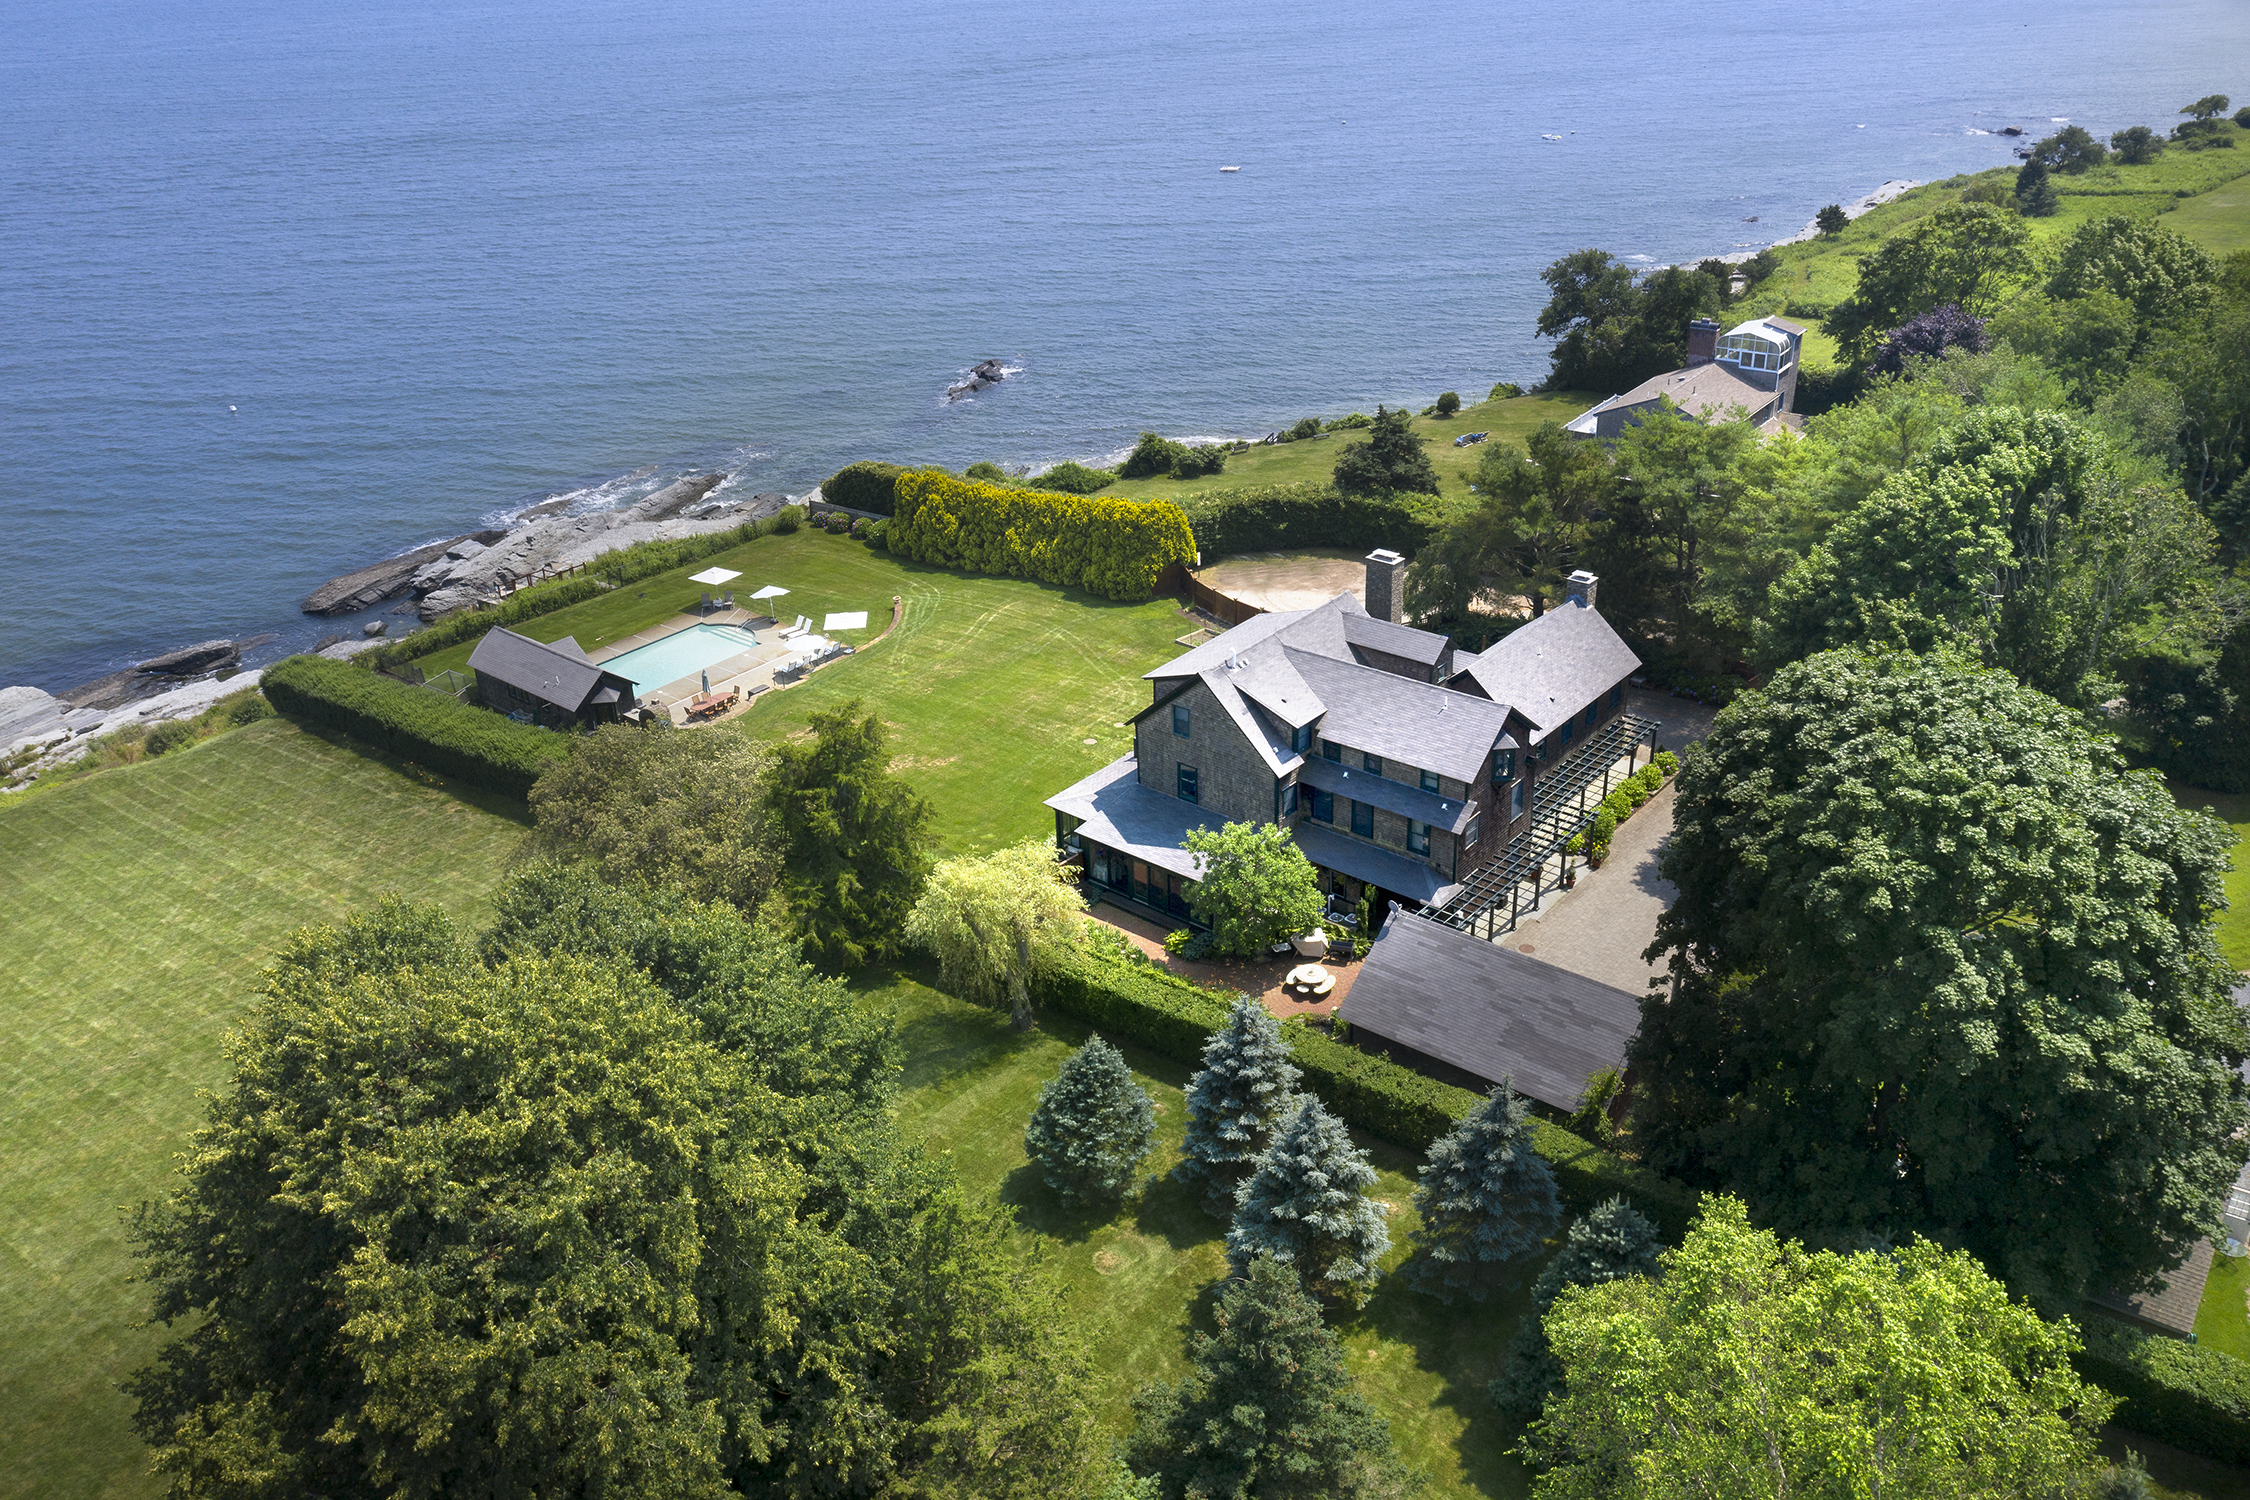 RI real estate: The 10 most expensive houses sold in 2022 and where they are